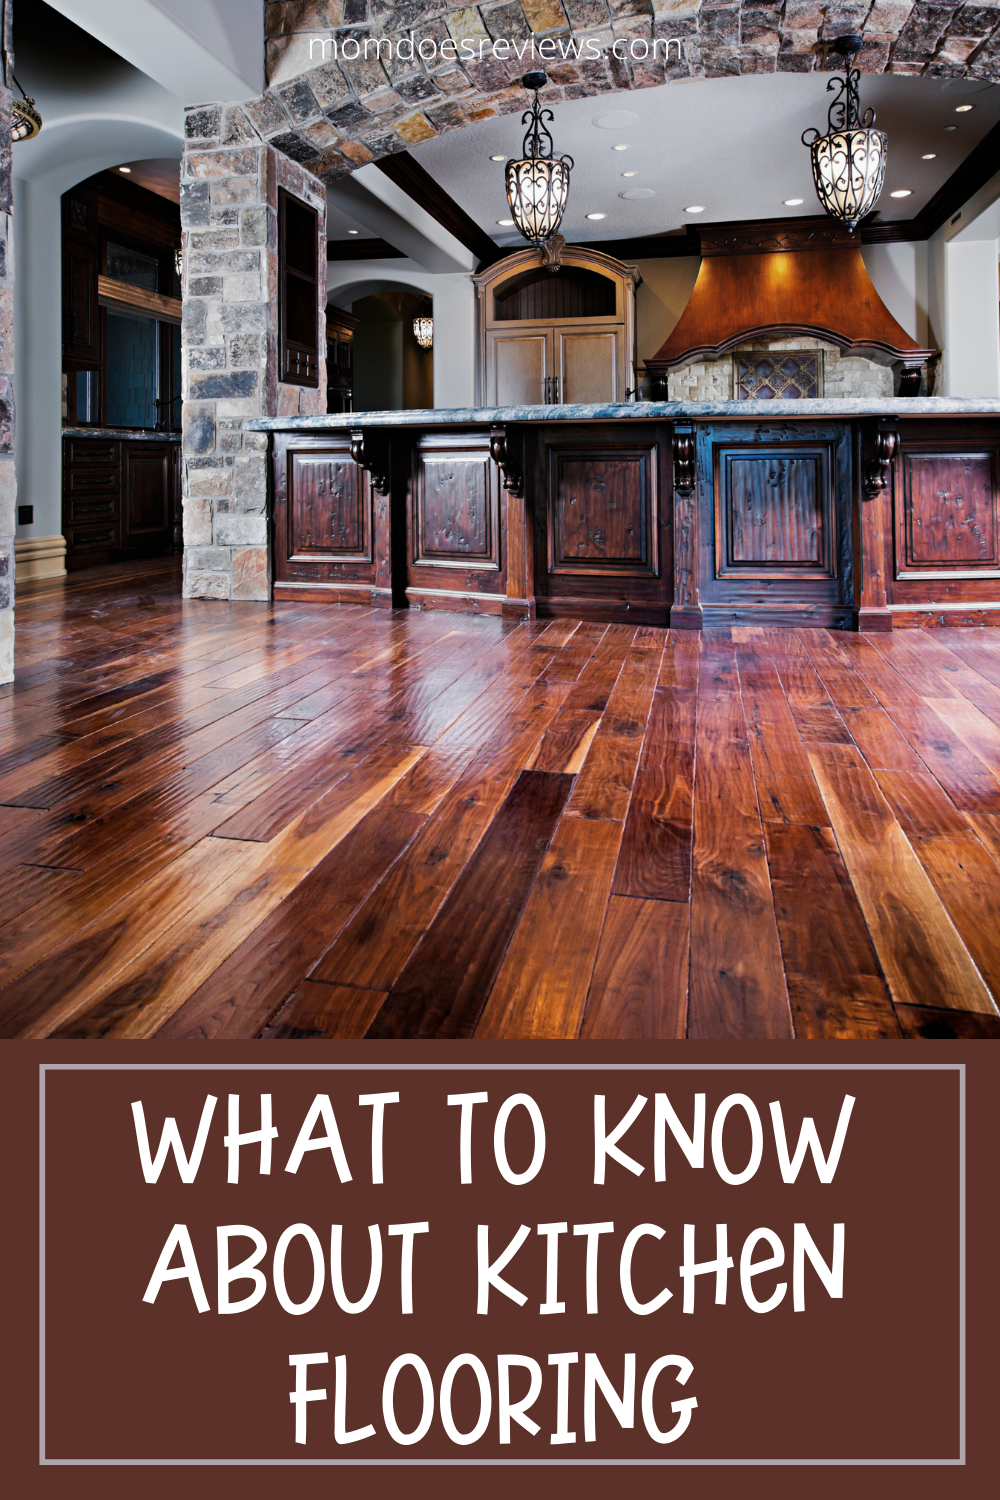 3 Facts You Need to Know About Kitchen Flooring